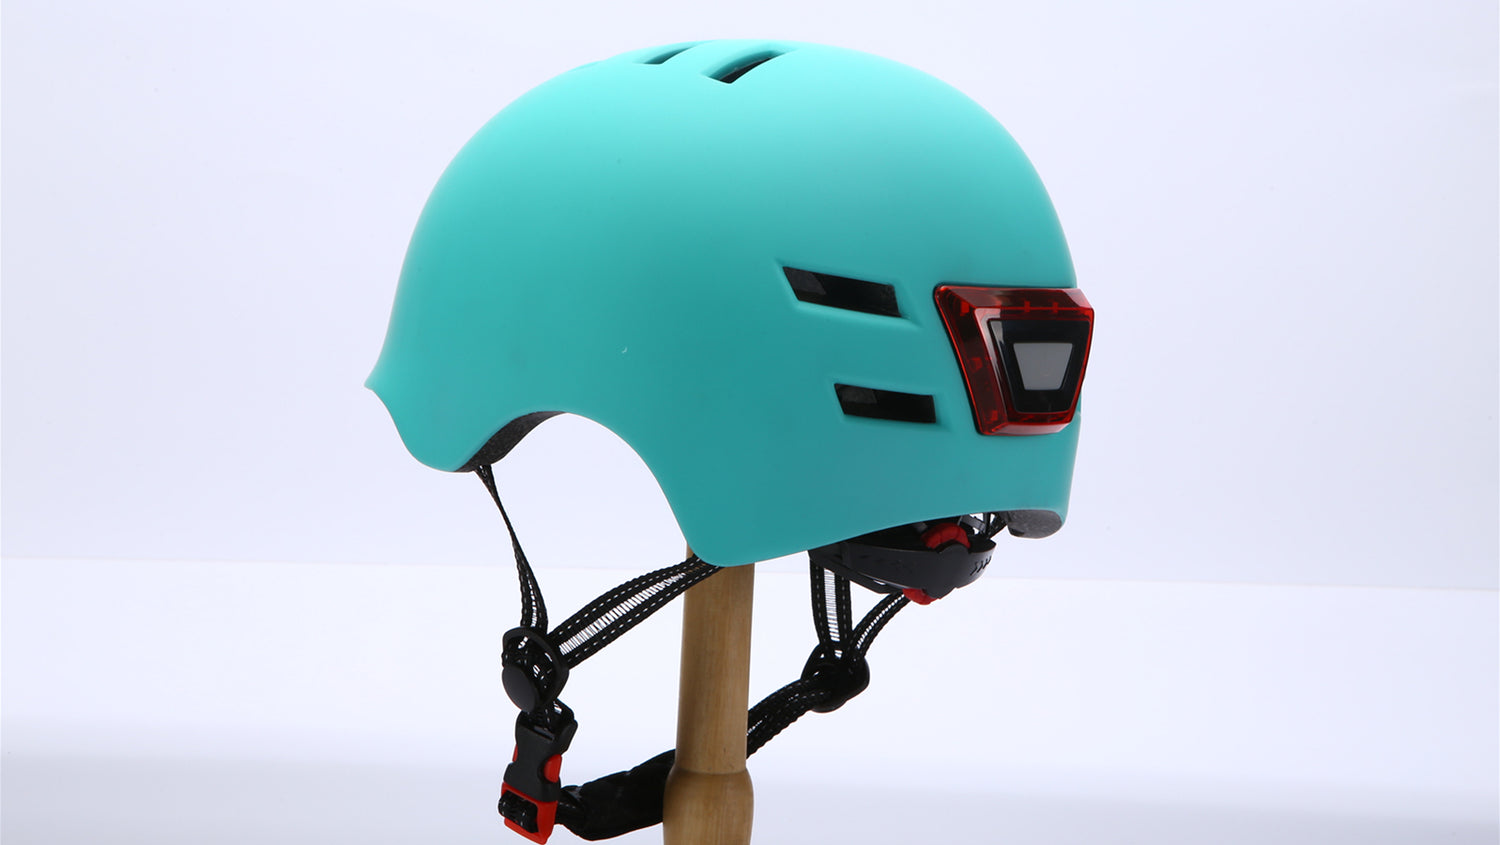 Gudook Manufacturer-High Impact Resistance Shared Safety Riding Road LED Helmet for Bicycle, Scooter, Skateboard, Ski Water Sports, Urban Commuter, Short Track Speed